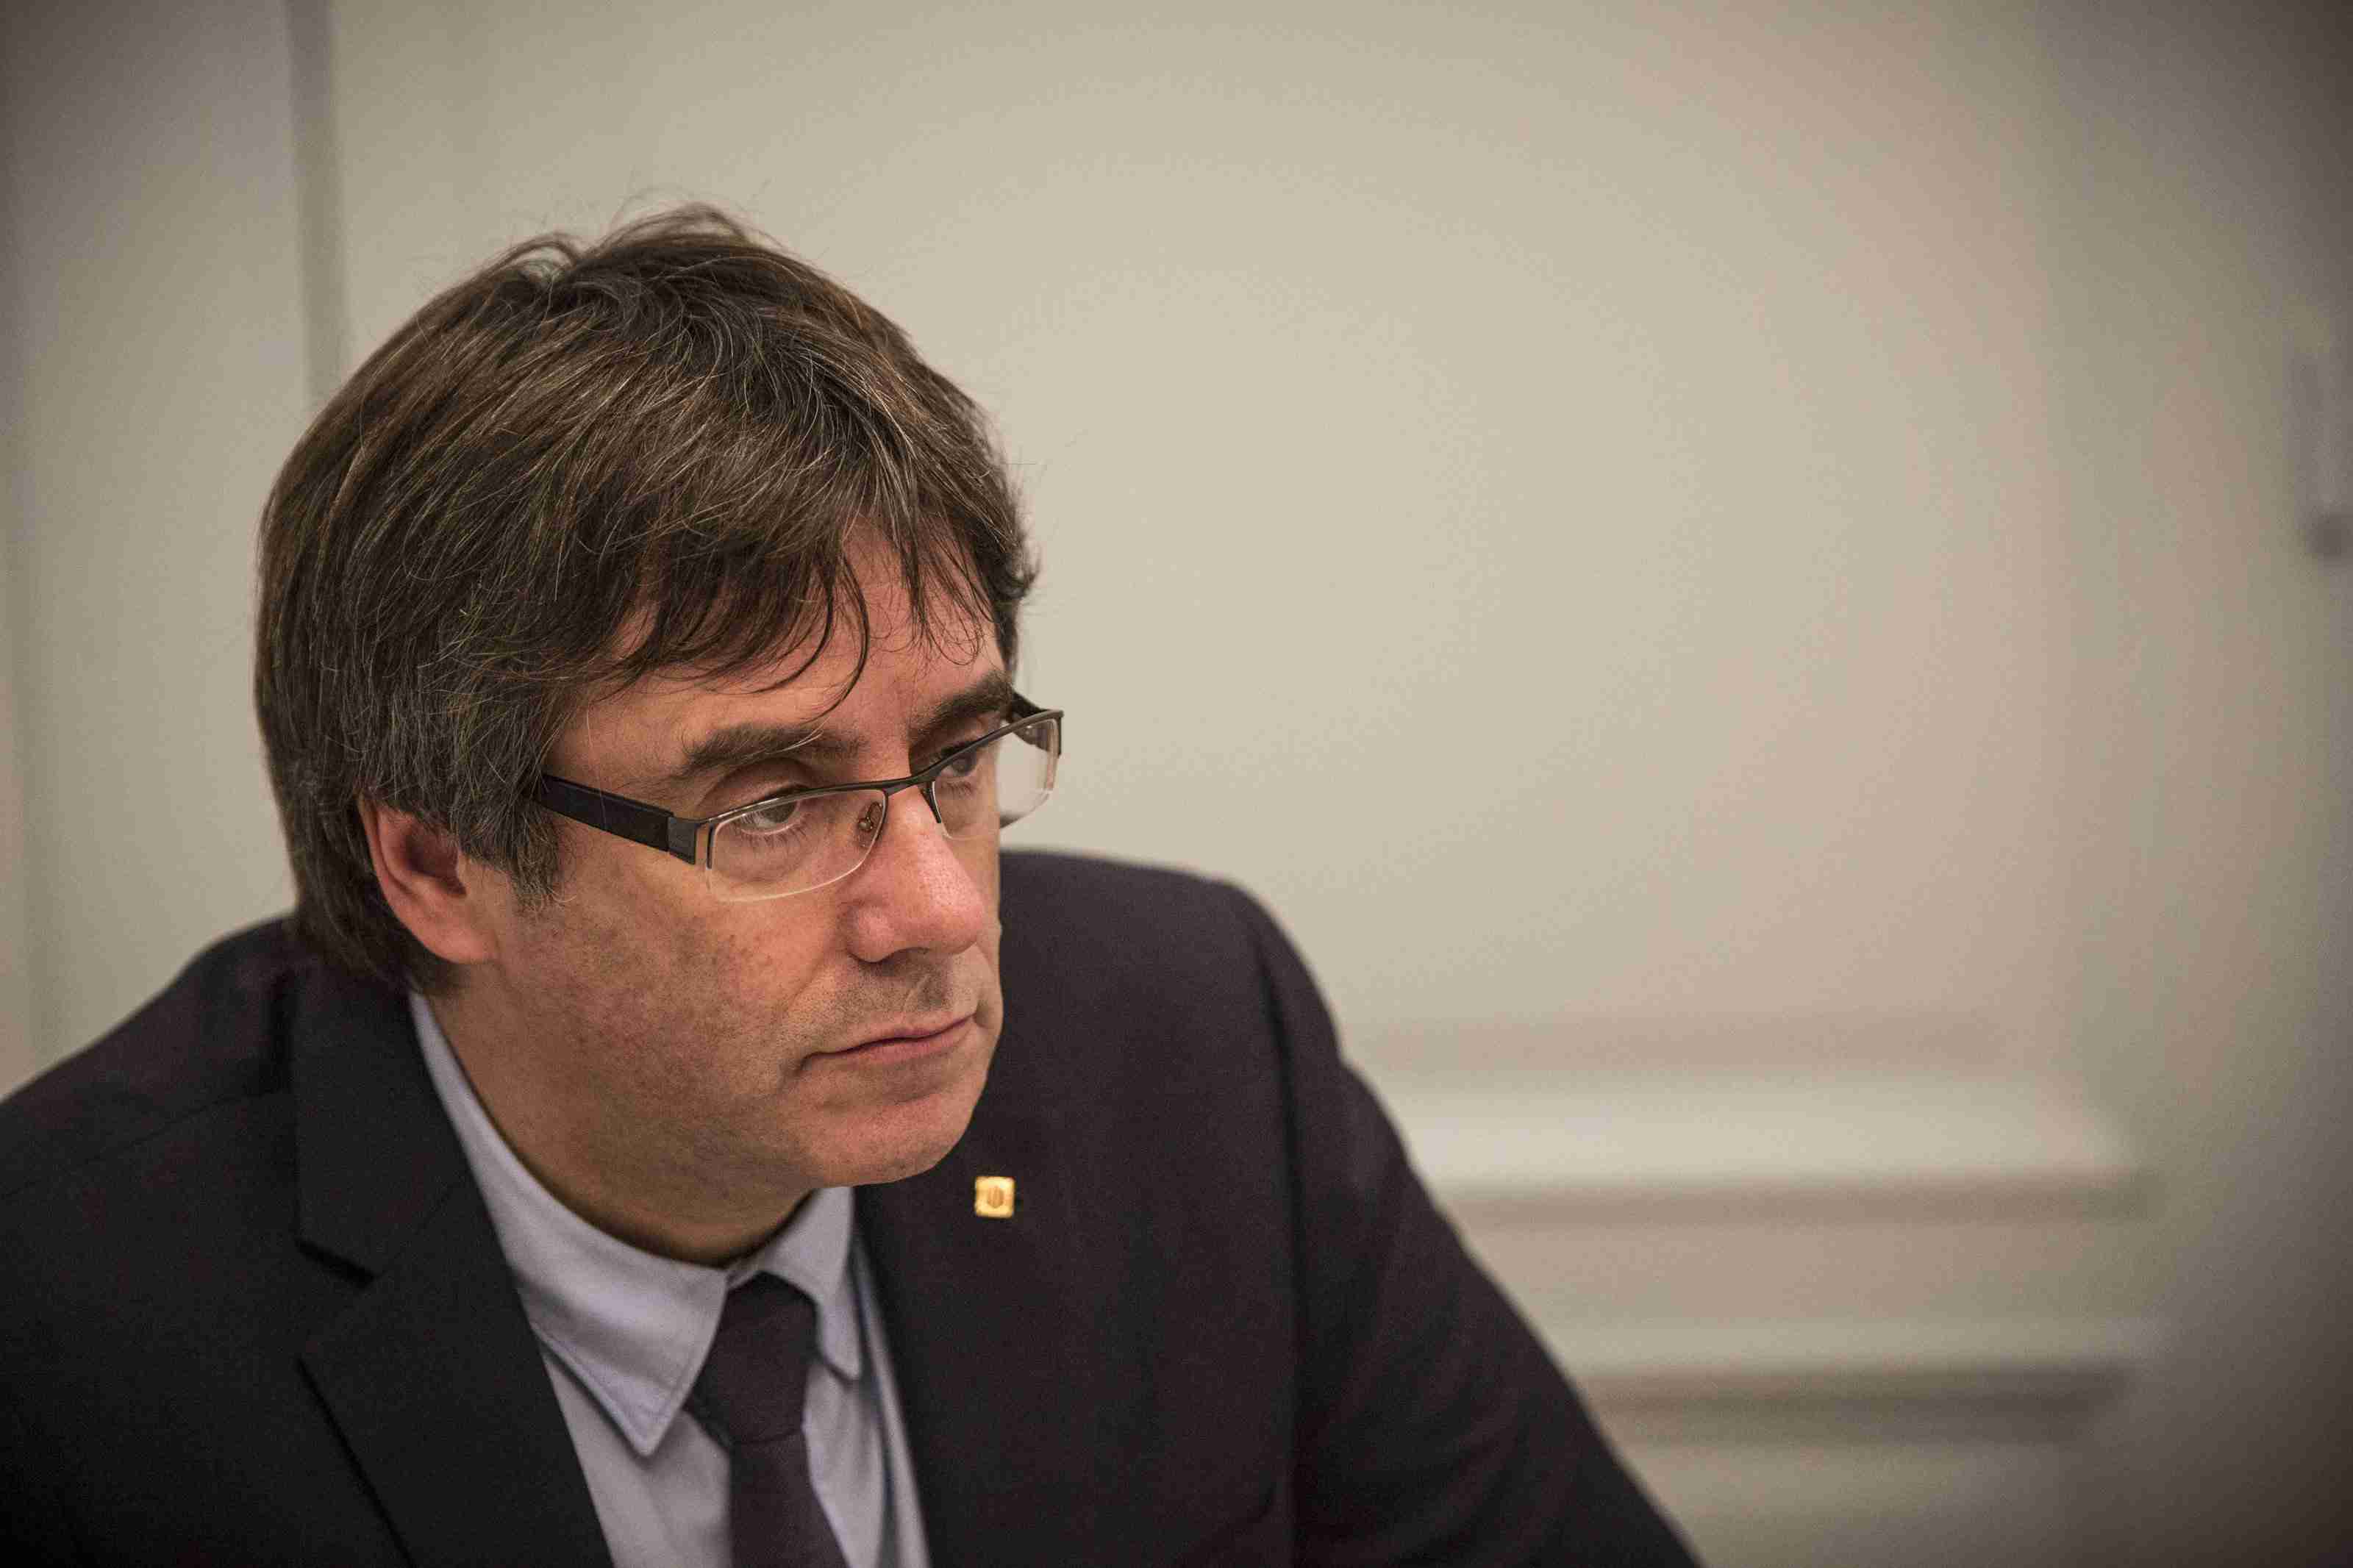 Puigdemont: "The Spanish king of 3rd October is not welcome in Catalonia"